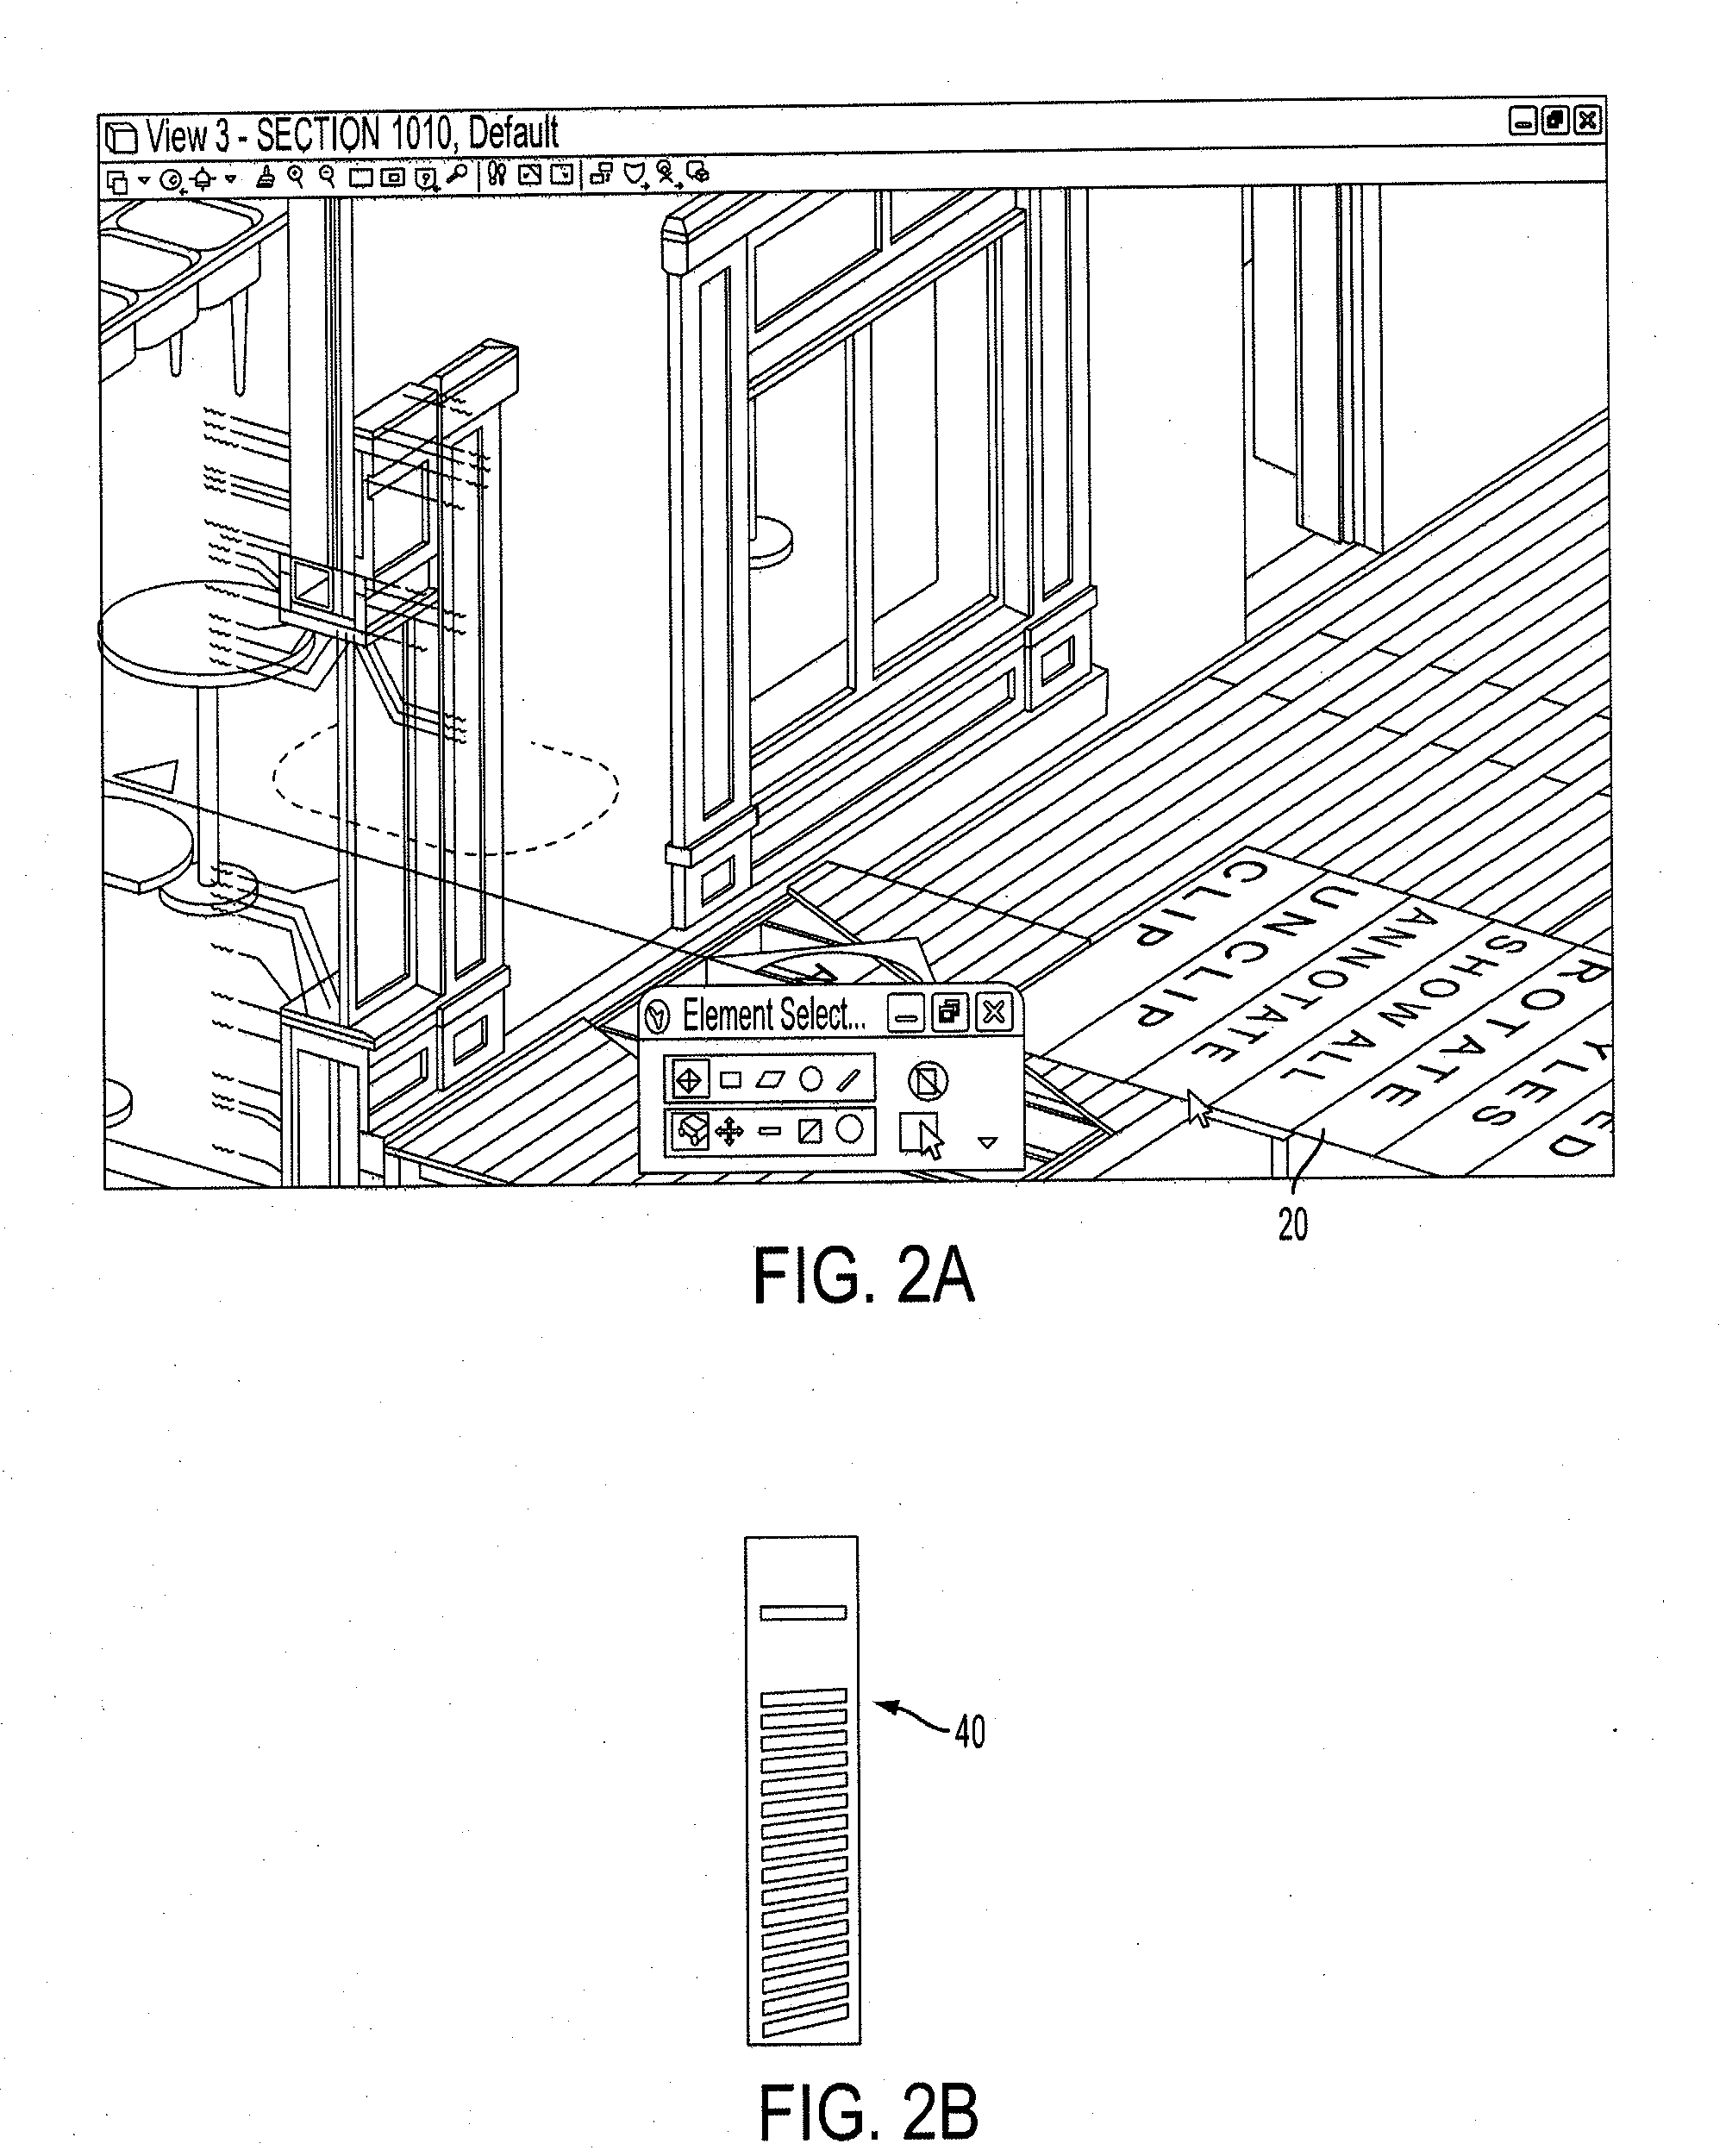 Multi-dimensional artifact assemblage for infrastructure and other assets with interface node mediators